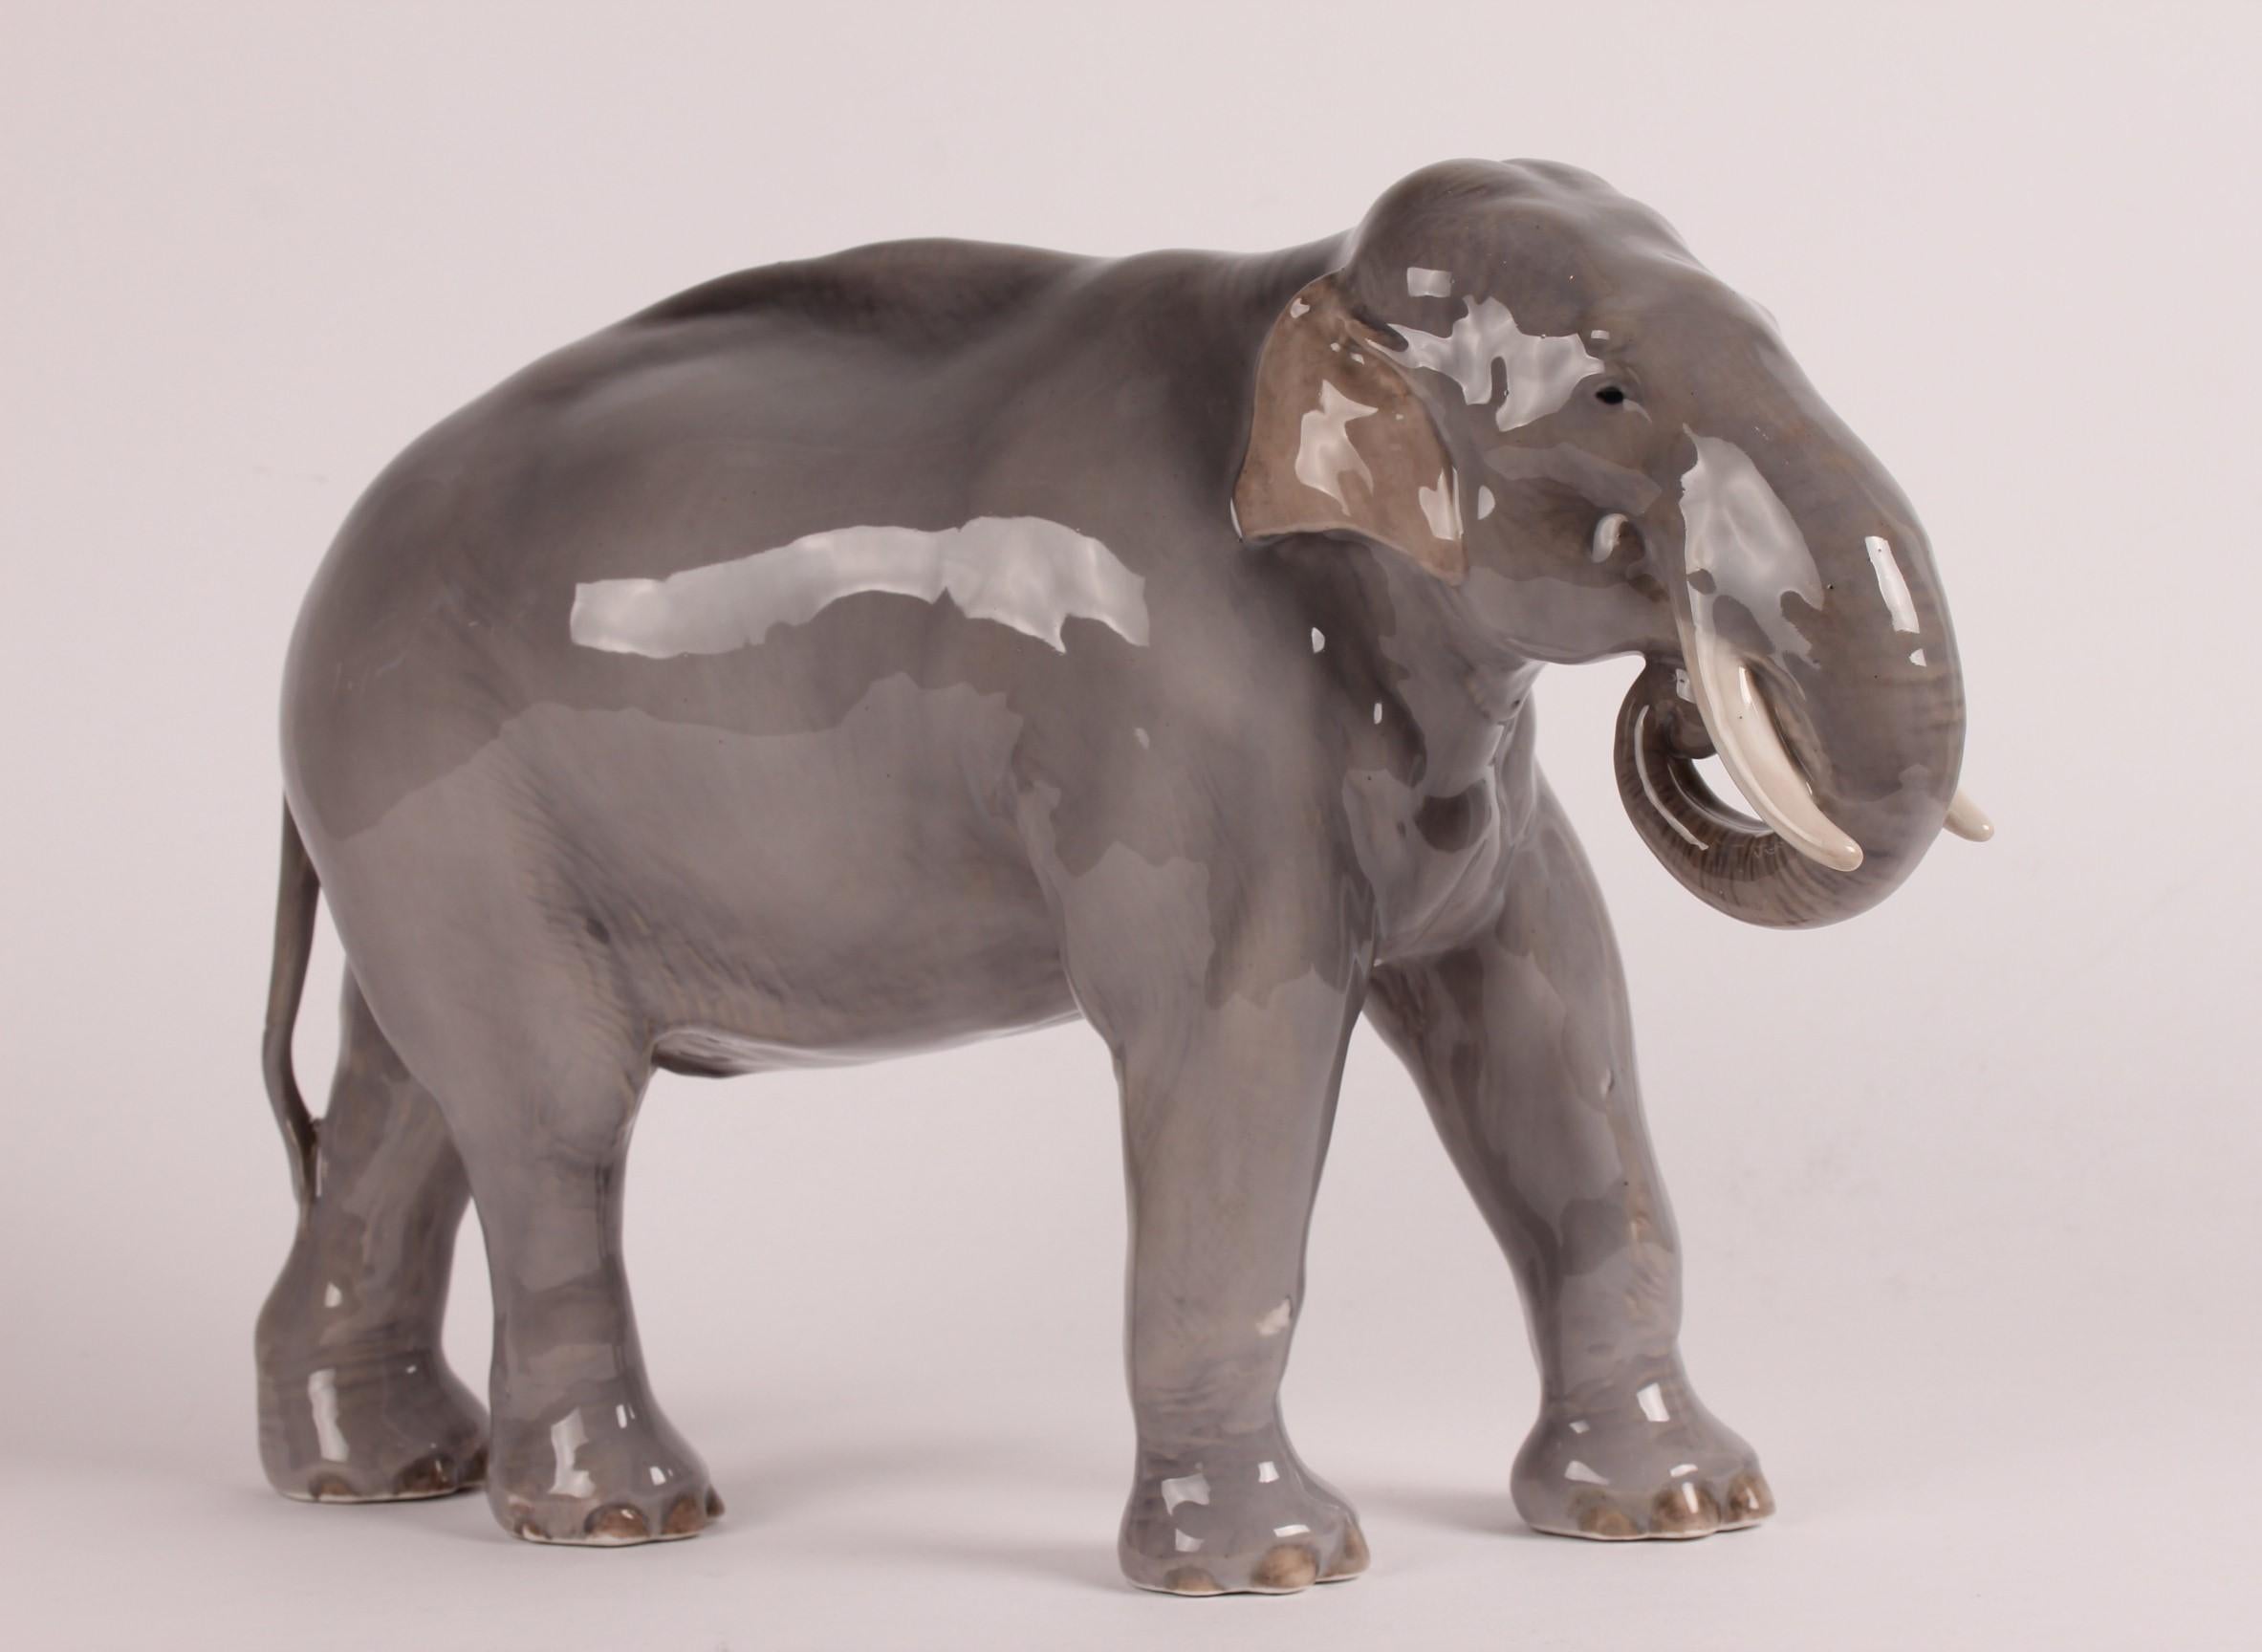 Huge Danish porcelain figure of an elephant model 447 designed by Theodor Madsen and manufactured by Royal Copenhagen.

The figure is decorated with glossy glaze in grey, brown and creamy white colors

Stamped with the three waves of Royal